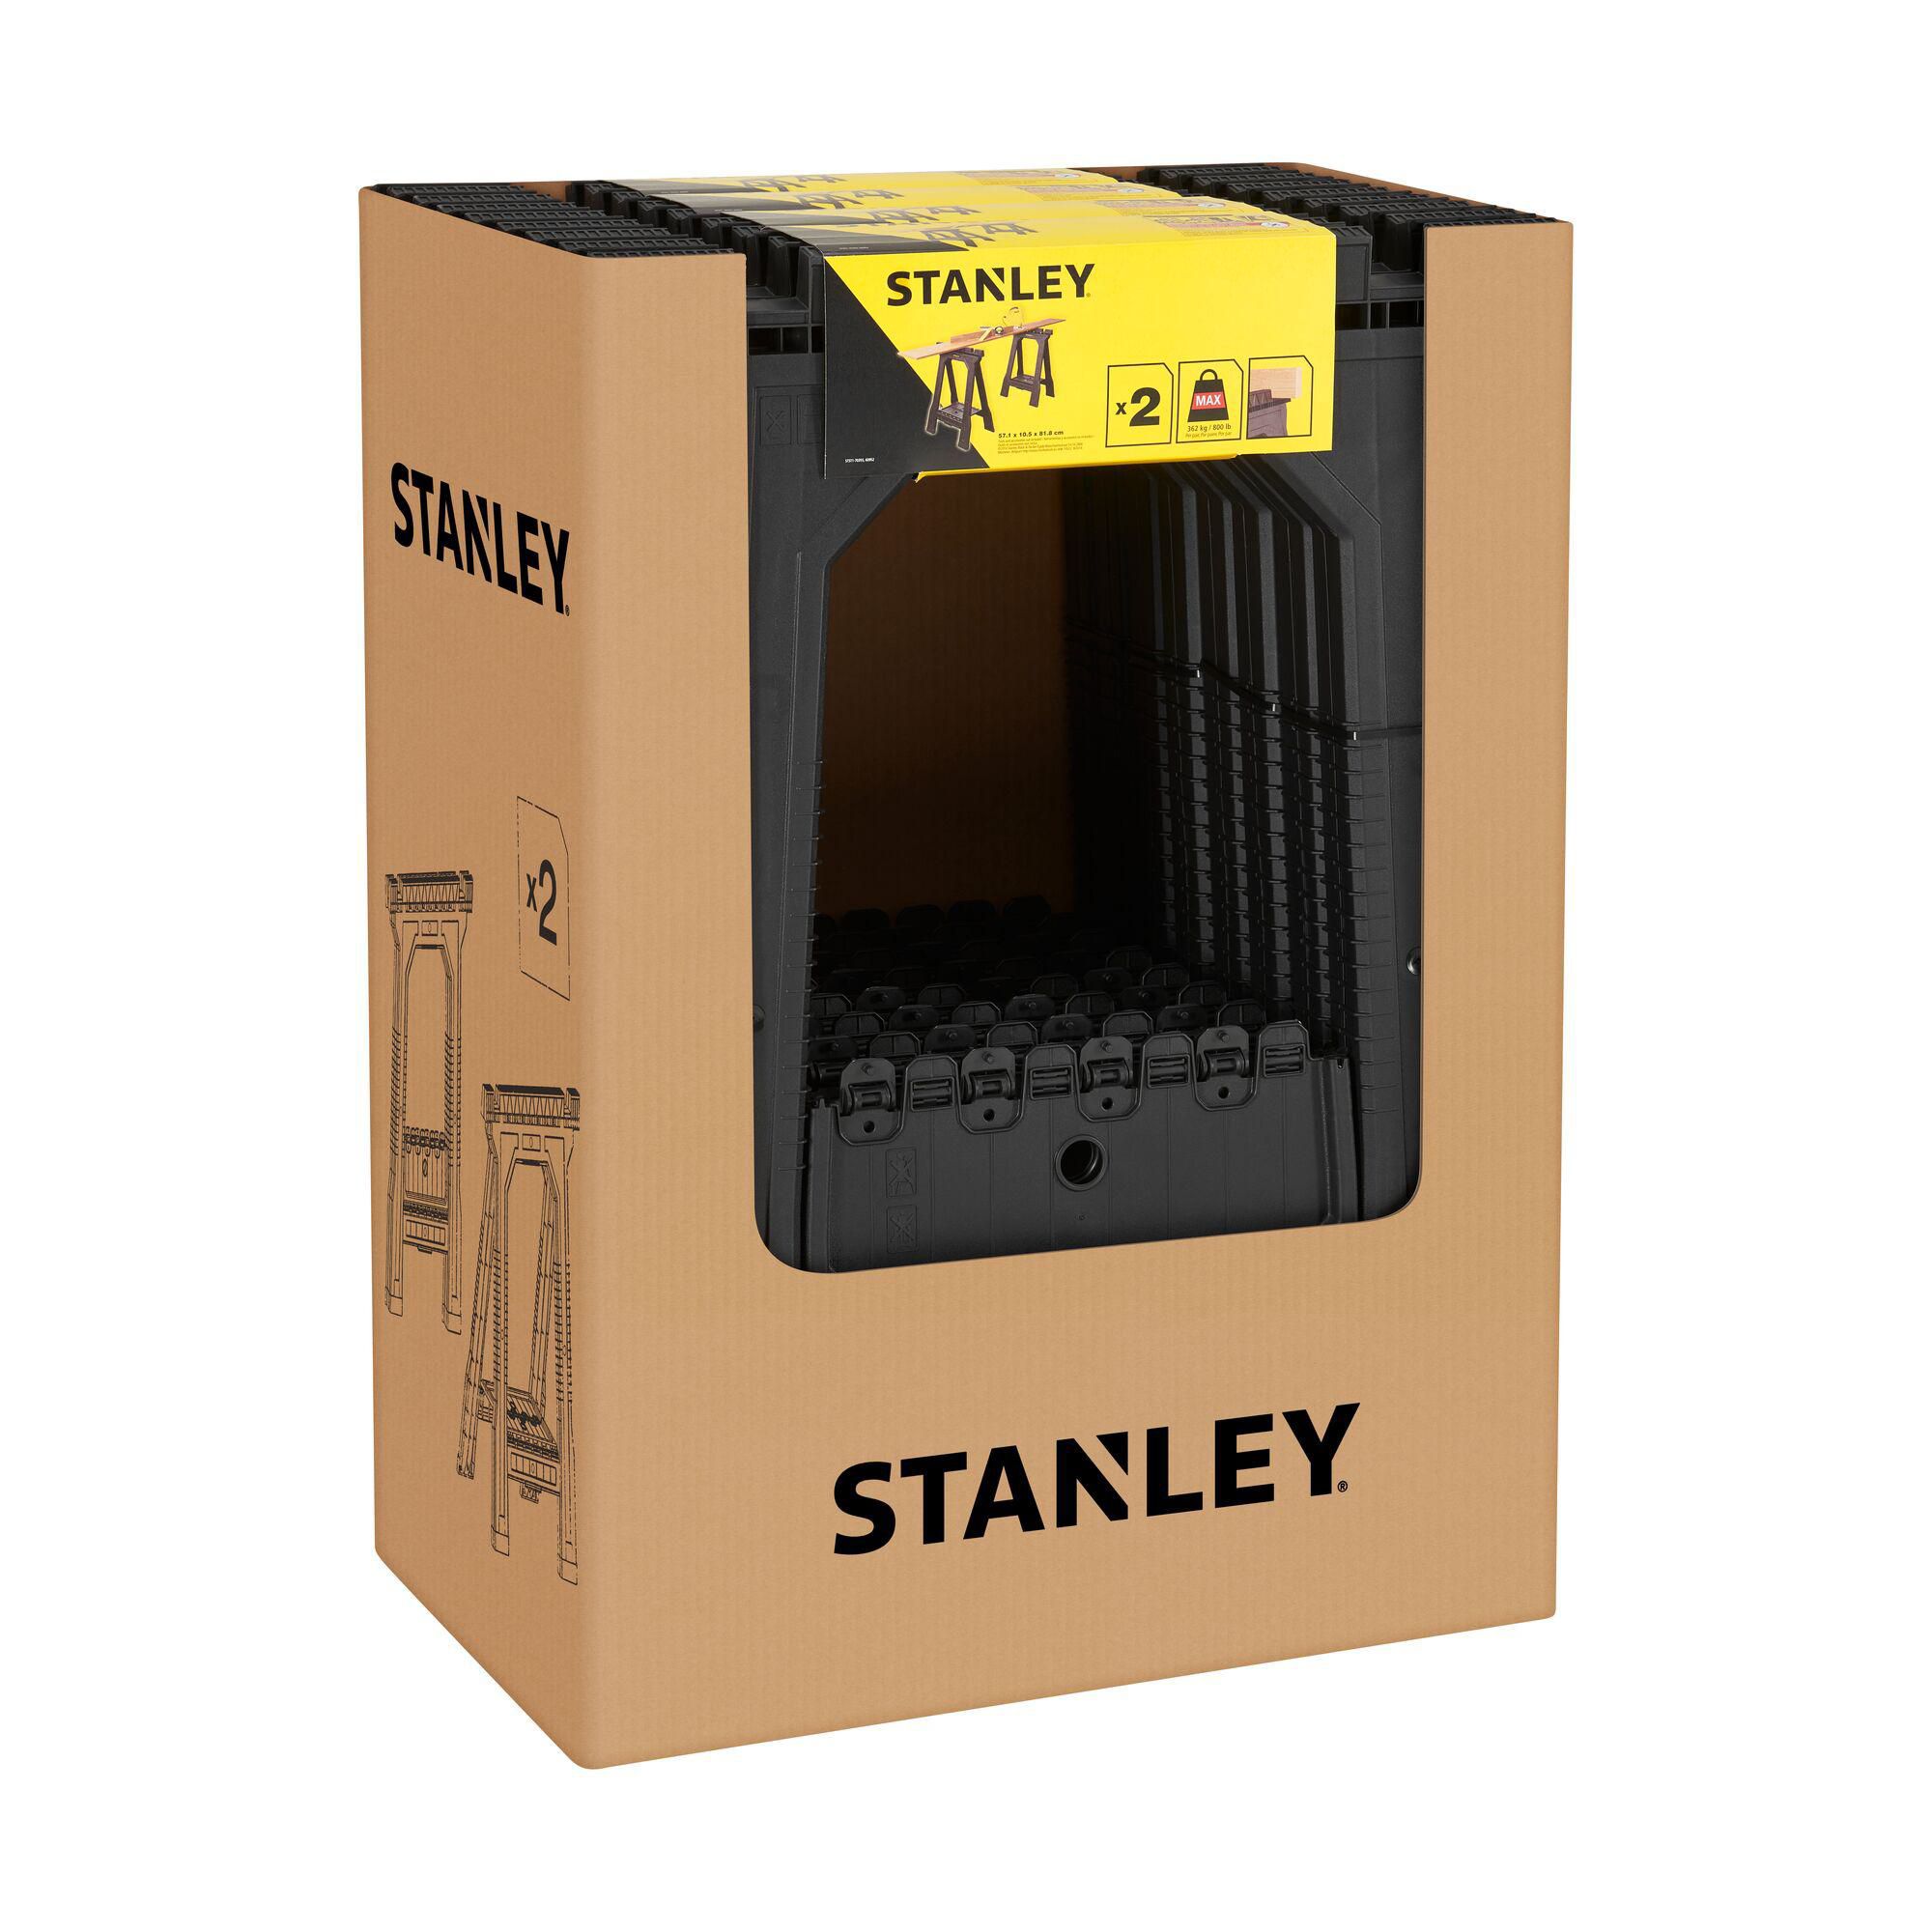 Stanley 362kg Foldable Saw horse, Pack of 2